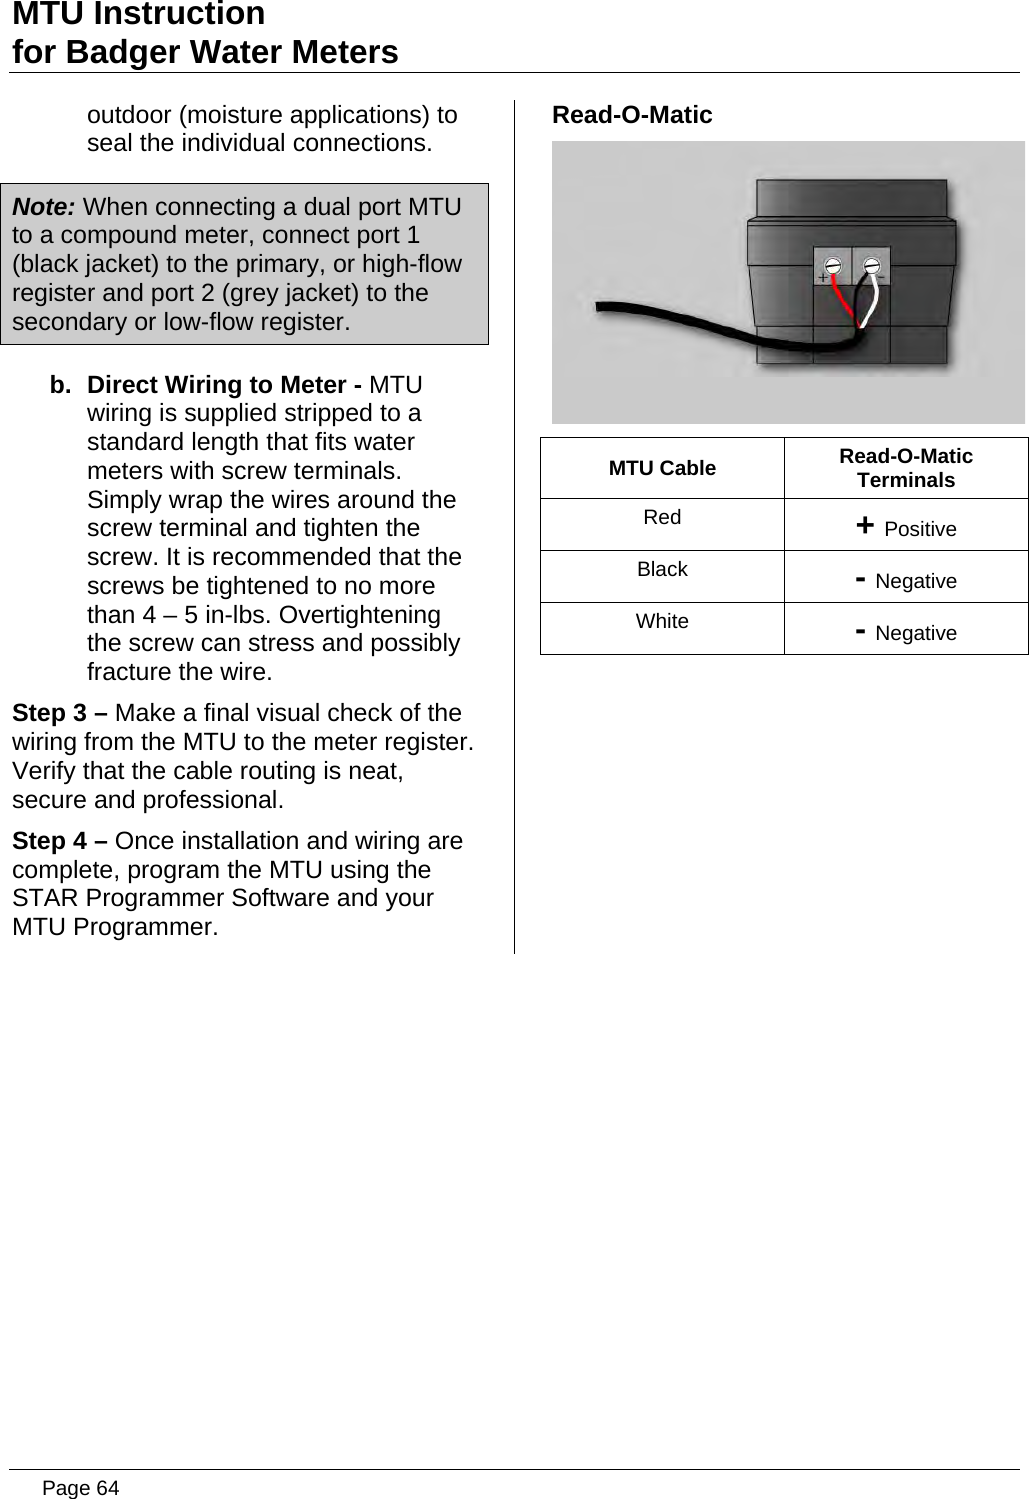 MTU Instruction for Badger Water Meters outdoor (moisture applications) to seal the individual connections. Note: When connecting a dual port MTU to a compound meter, connect port 1 (black jacket) to the primary, or high-flow register and port 2 (grey jacket) to the secondary or low-flow register. b.  Direct Wiring to Meter - MTU wiring is supplied stripped to a standard length that fits water meters with screw terminals. Simply wrap the wires around the screw terminal and tighten the screw. It is recommended that the screws be tightened to no more than 4 – 5 in-lbs. Overtightening the screw can stress and possibly fracture the wire. Step 3 – Make a final visual check of the wiring from the MTU to the meter register.  Verify that the cable routing is neat, secure and professional. Step 4 – Once installation and wiring are complete, program the MTU using the STAR Programmer Software and your MTU Programmer. Read-O-Matic  MTU Cable  Read-O-Matic Terminals Red  + Positive Black  - Negative White  - Negative   Page 64